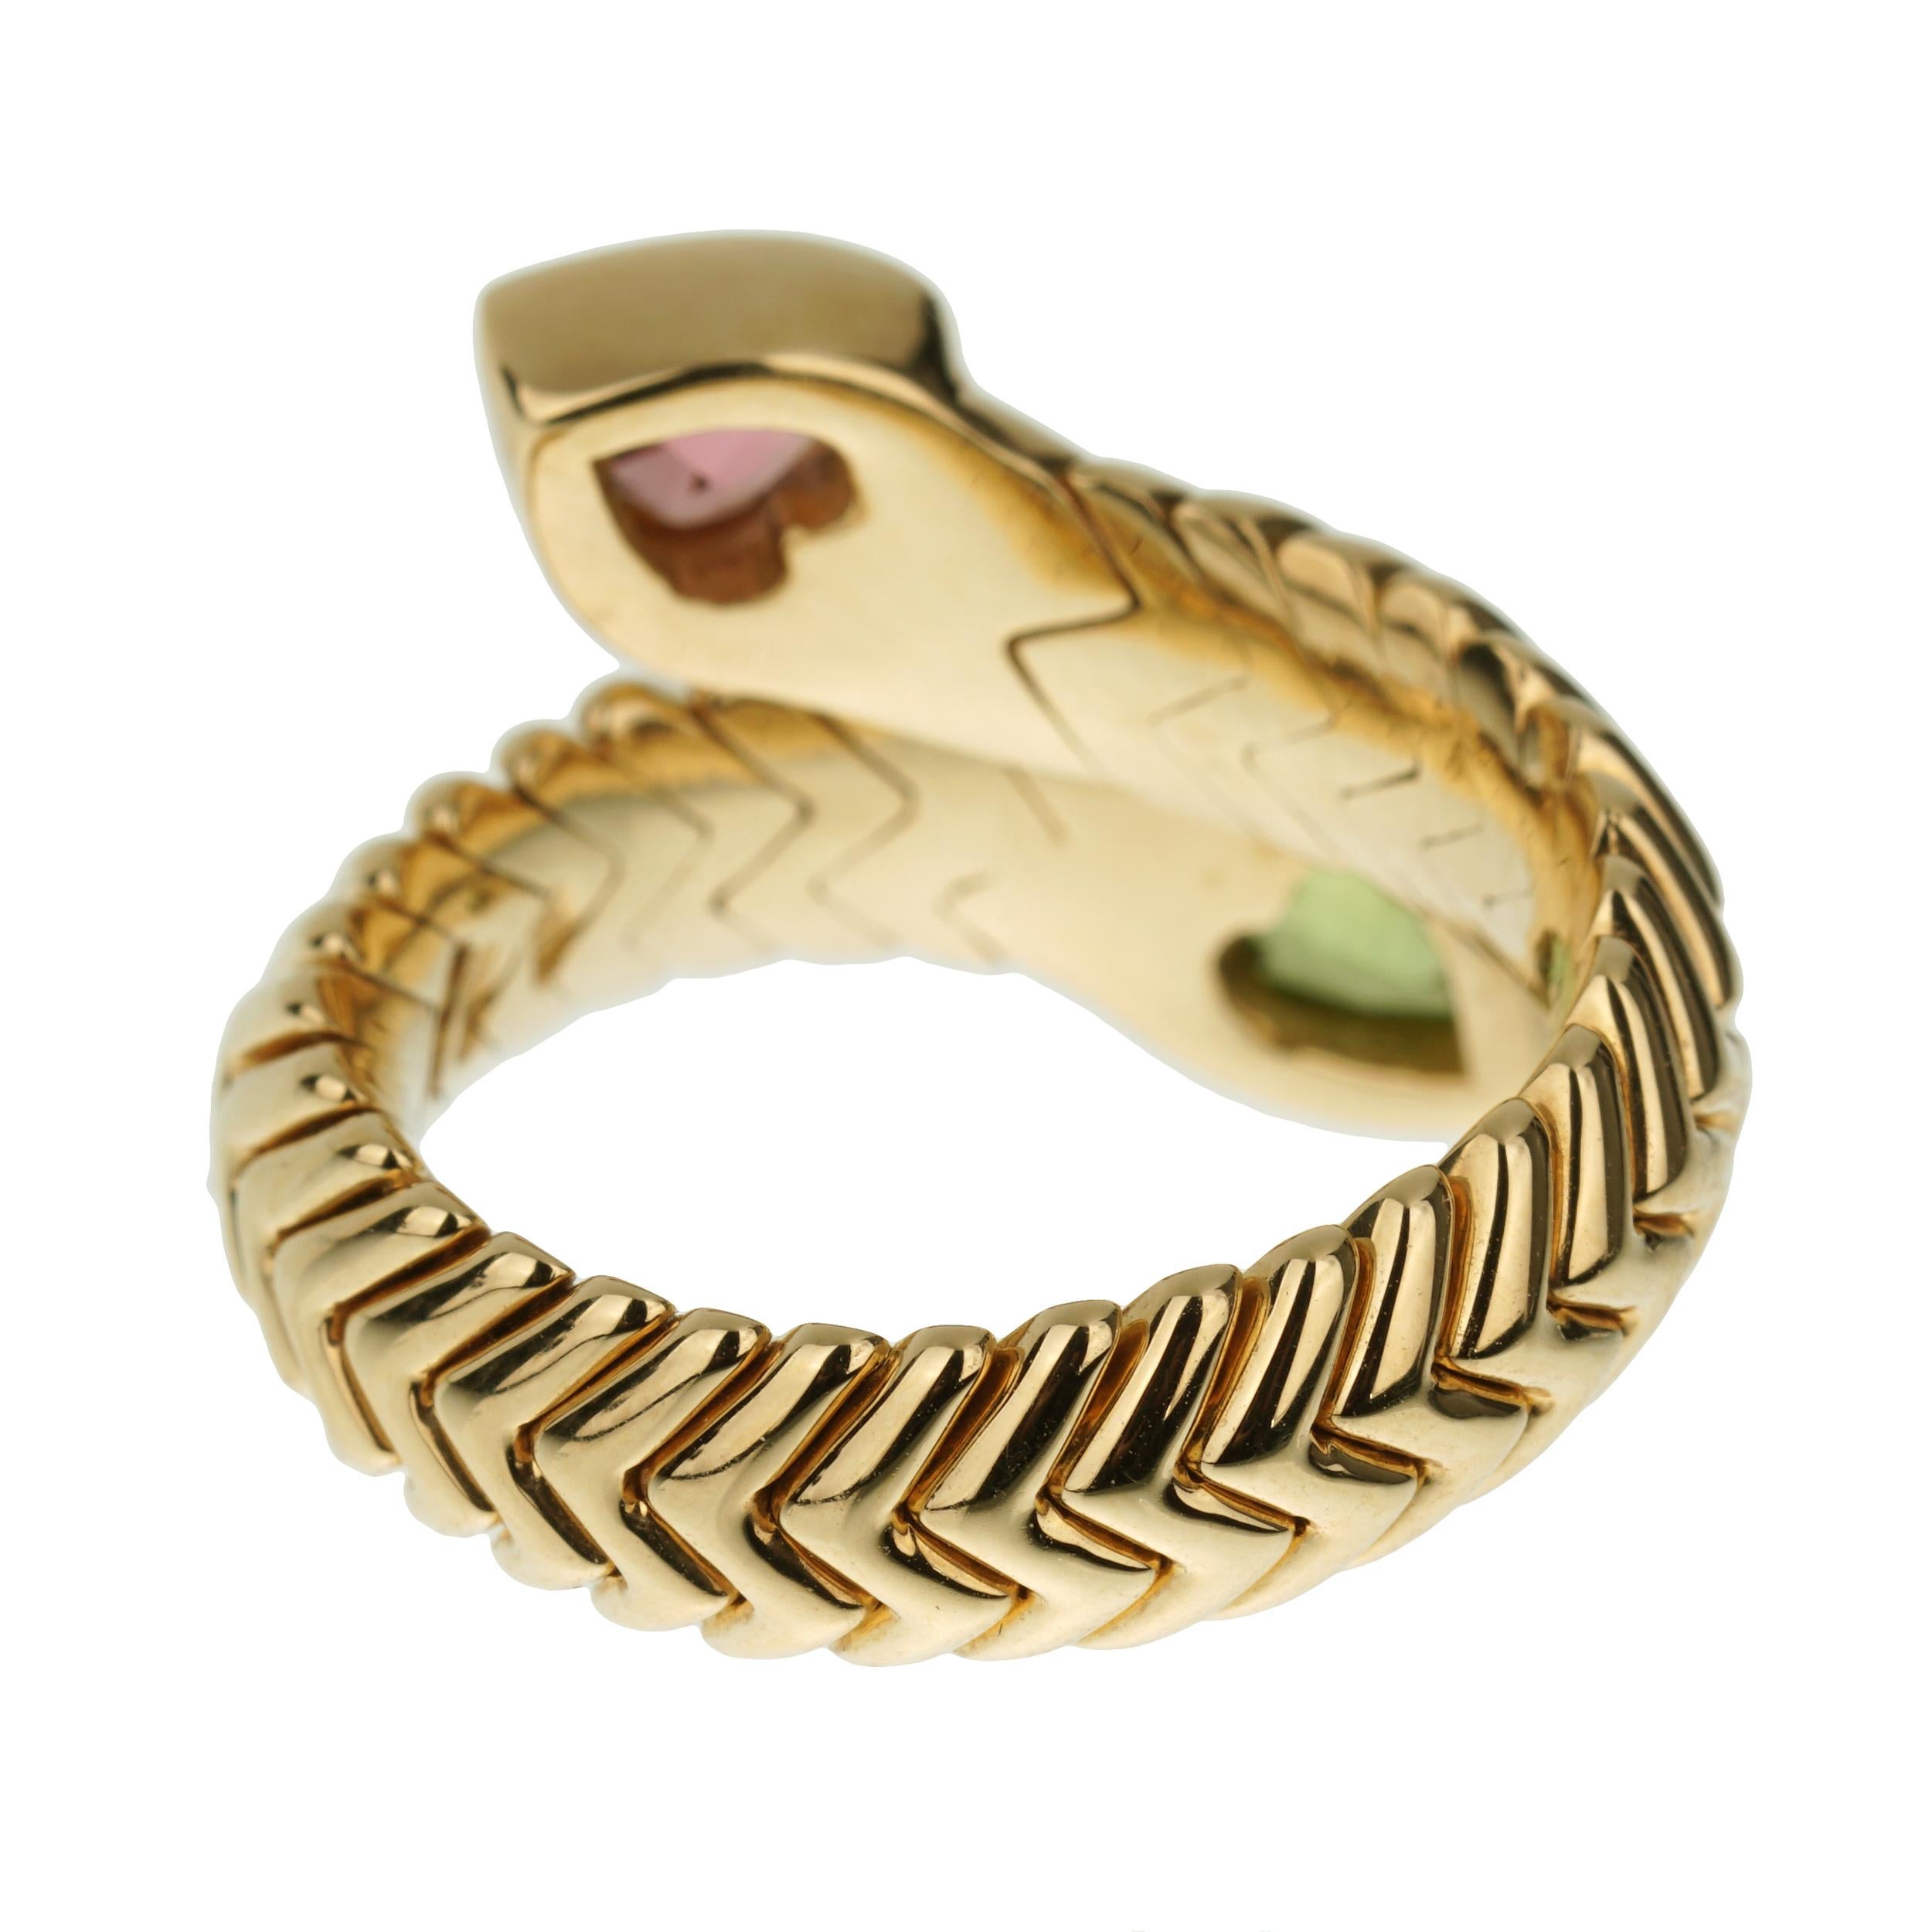 This exquisite vintage Bvlgari Spiga ring is a masterful blend of luxurious materials and iconic design, making it a standout piece in any jewelry collection. Crafted from rich 18k yellow gold, the ring showcases Bvlgari's signature Spiga pattern,